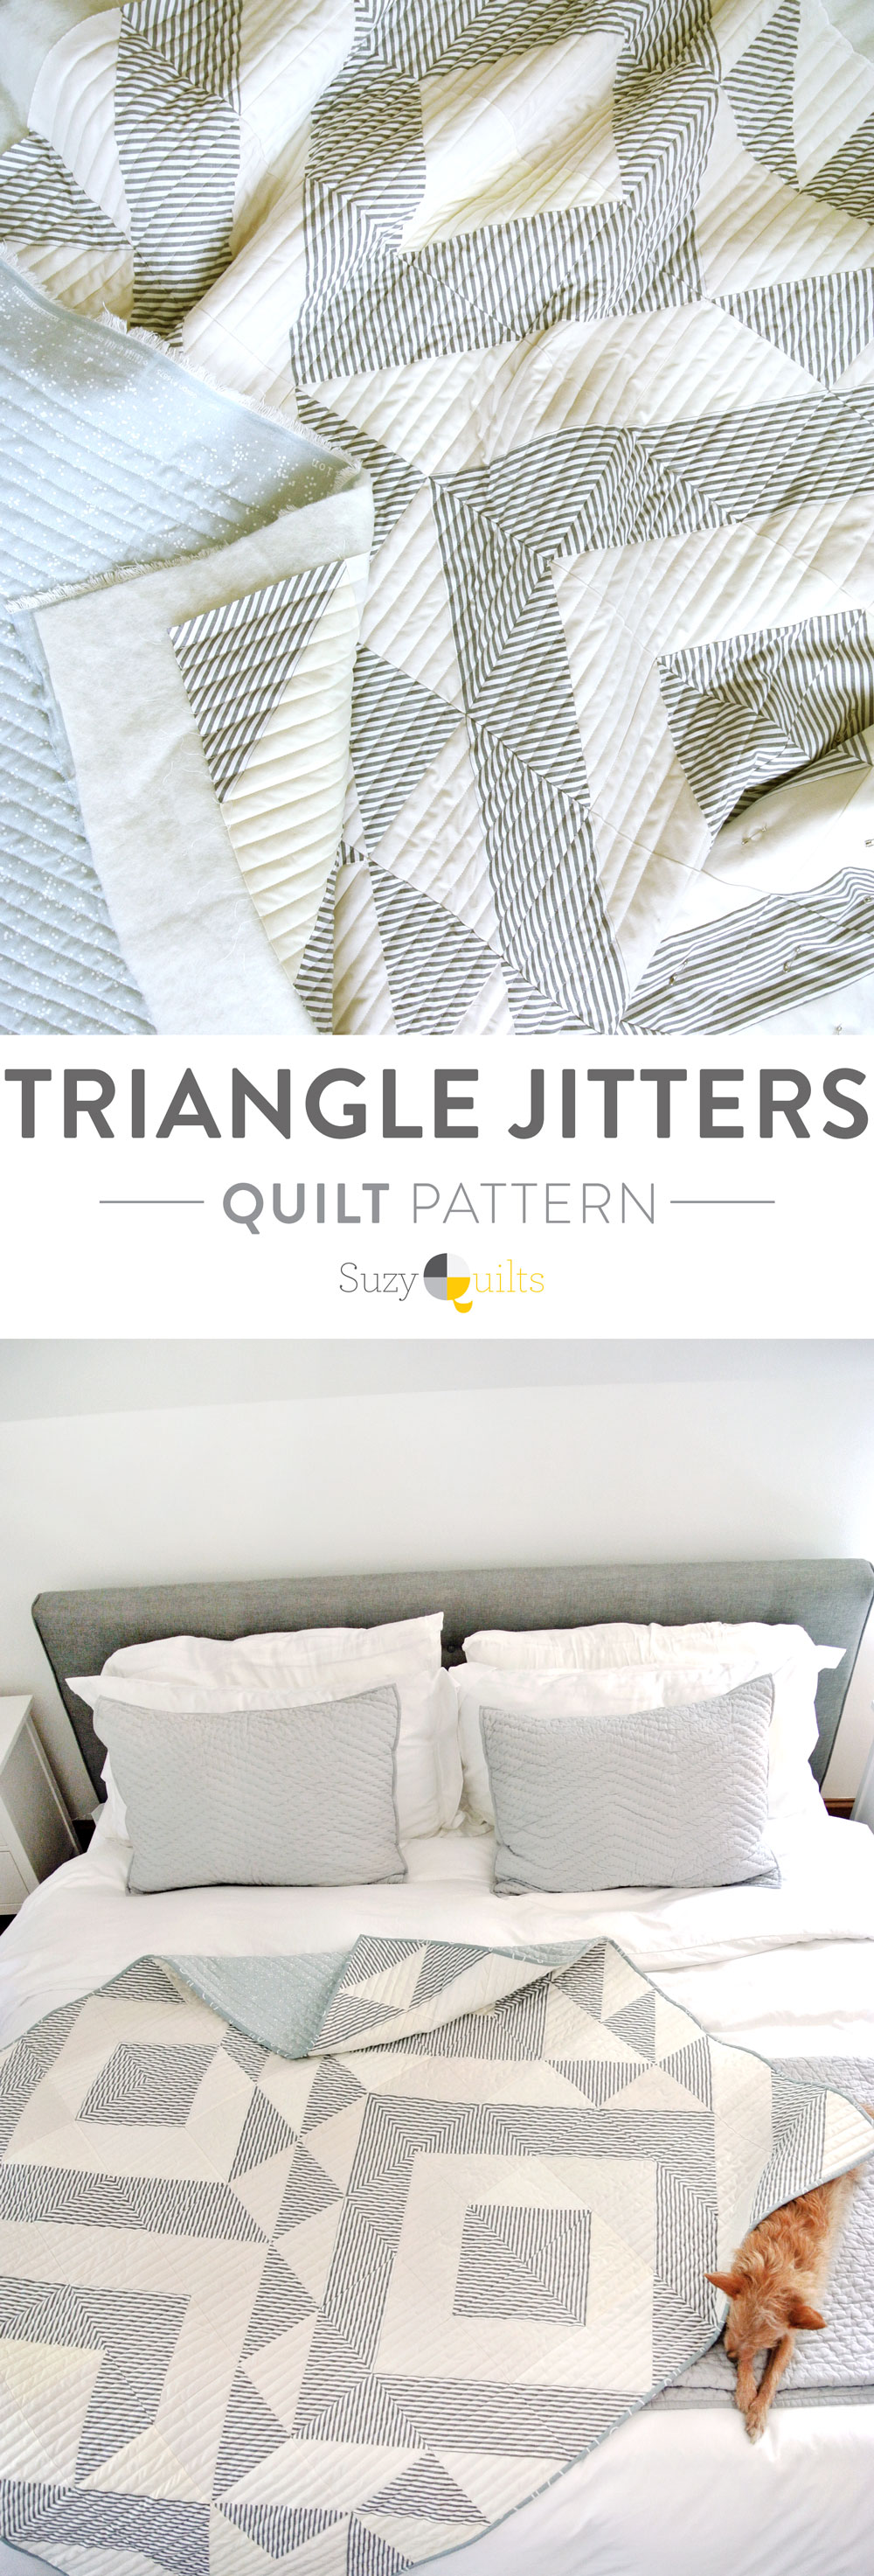 Triangle-Jitters-quilt-pattern-sale